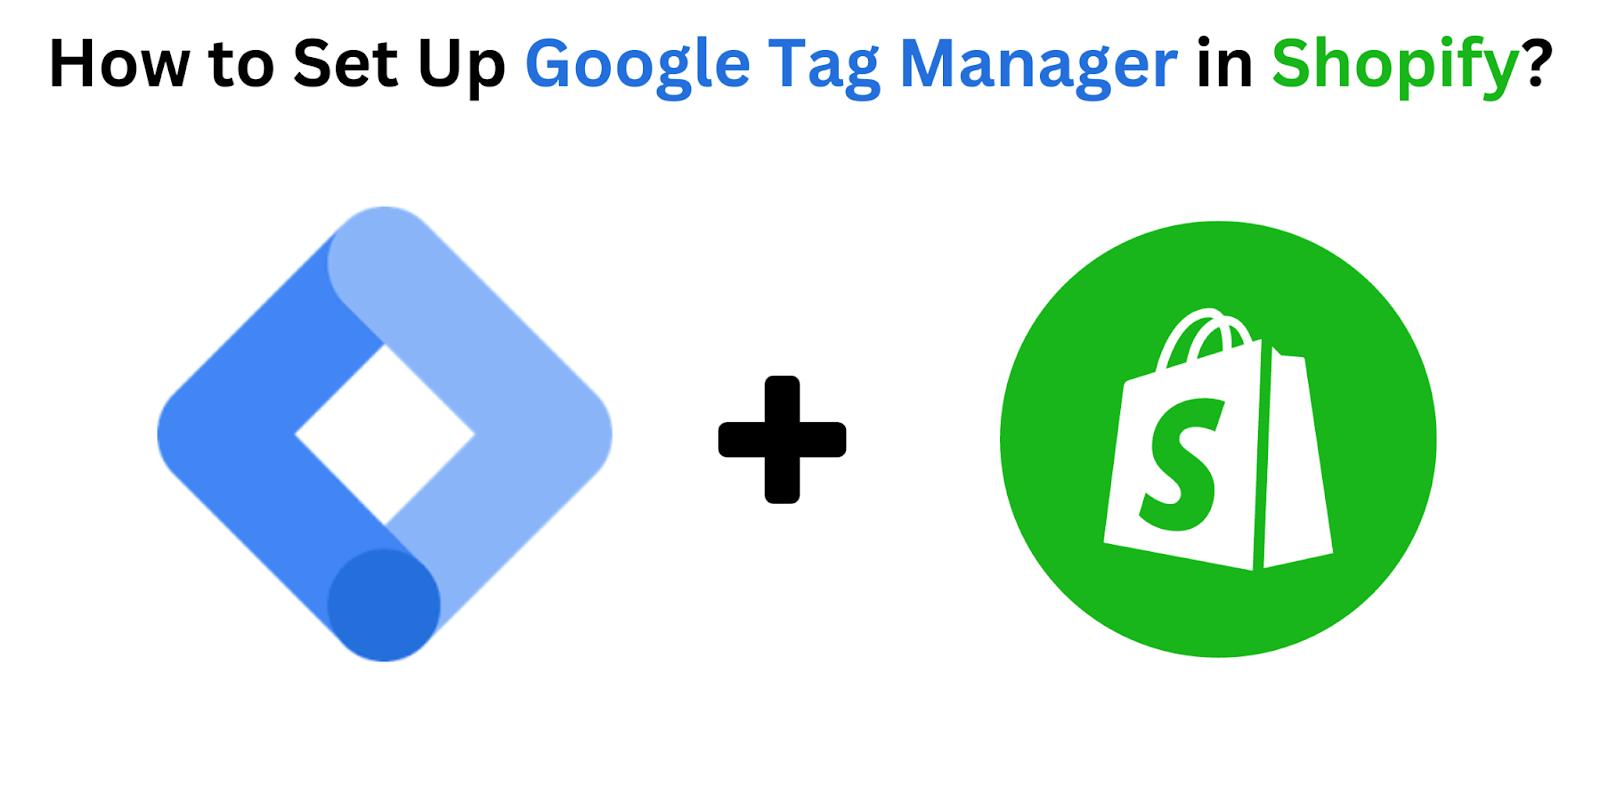 How To Set Up Google Tag Manager In Shopify?